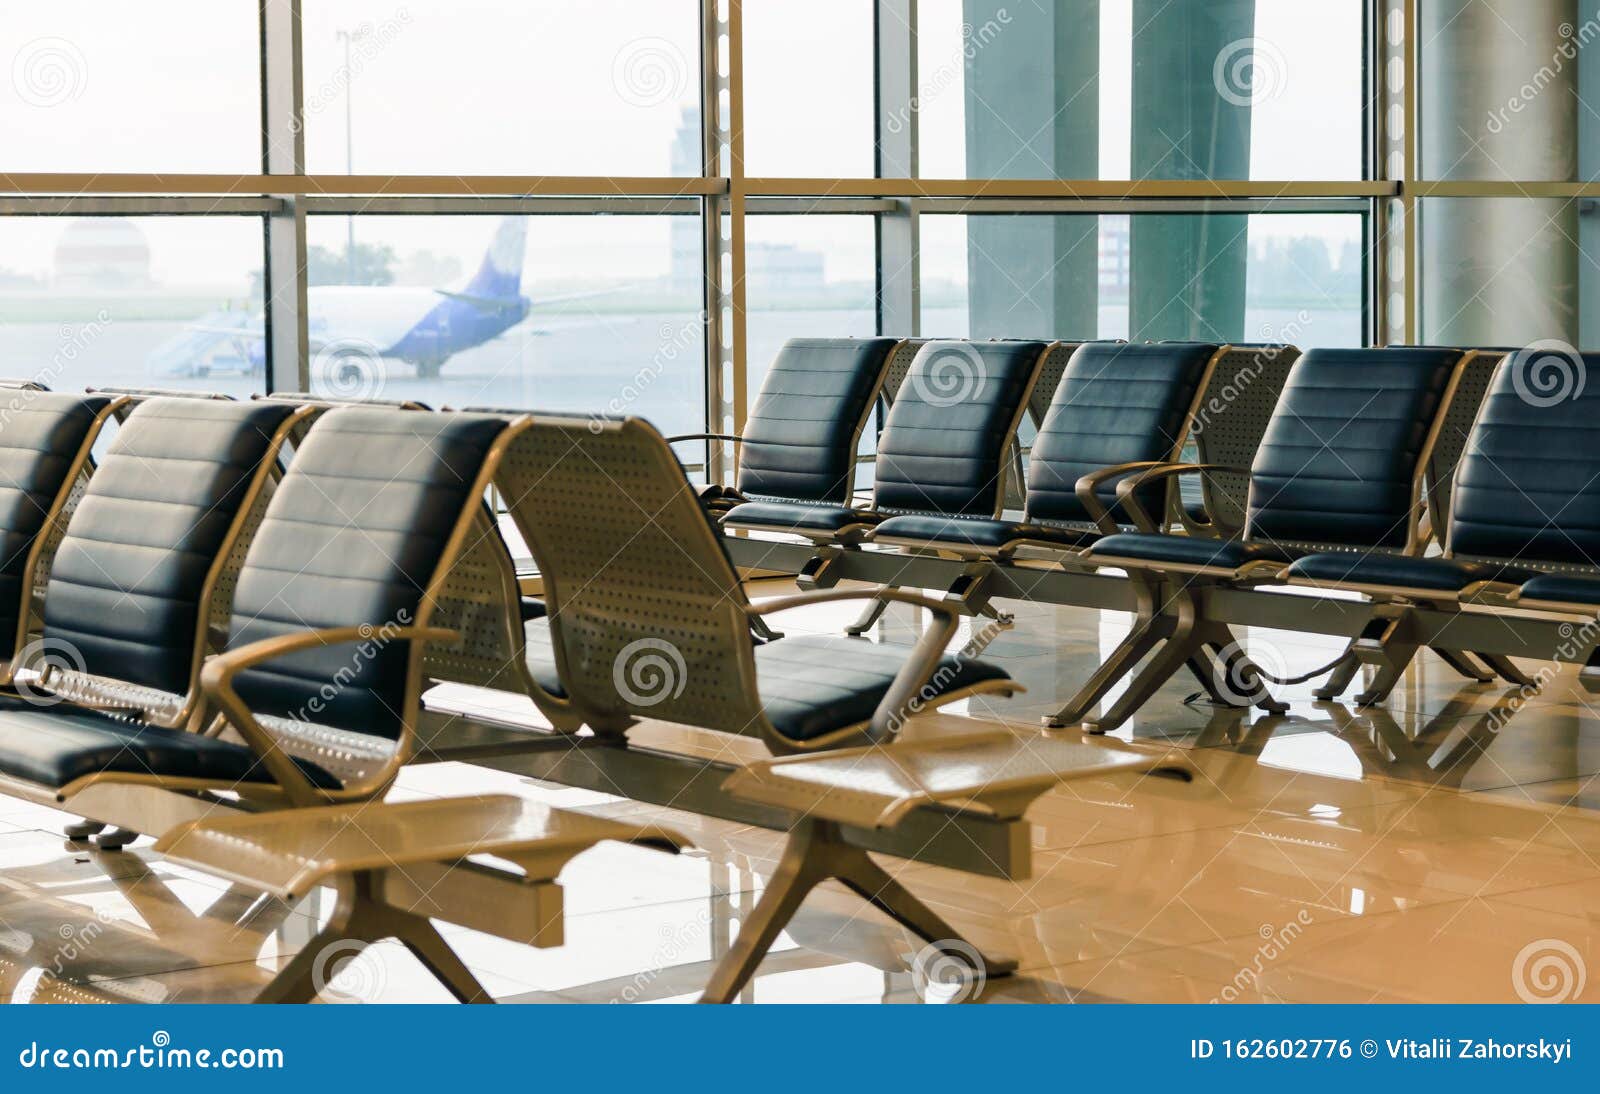 Concept Of Travel Seats In The Airport Lounge In The Rays Of The